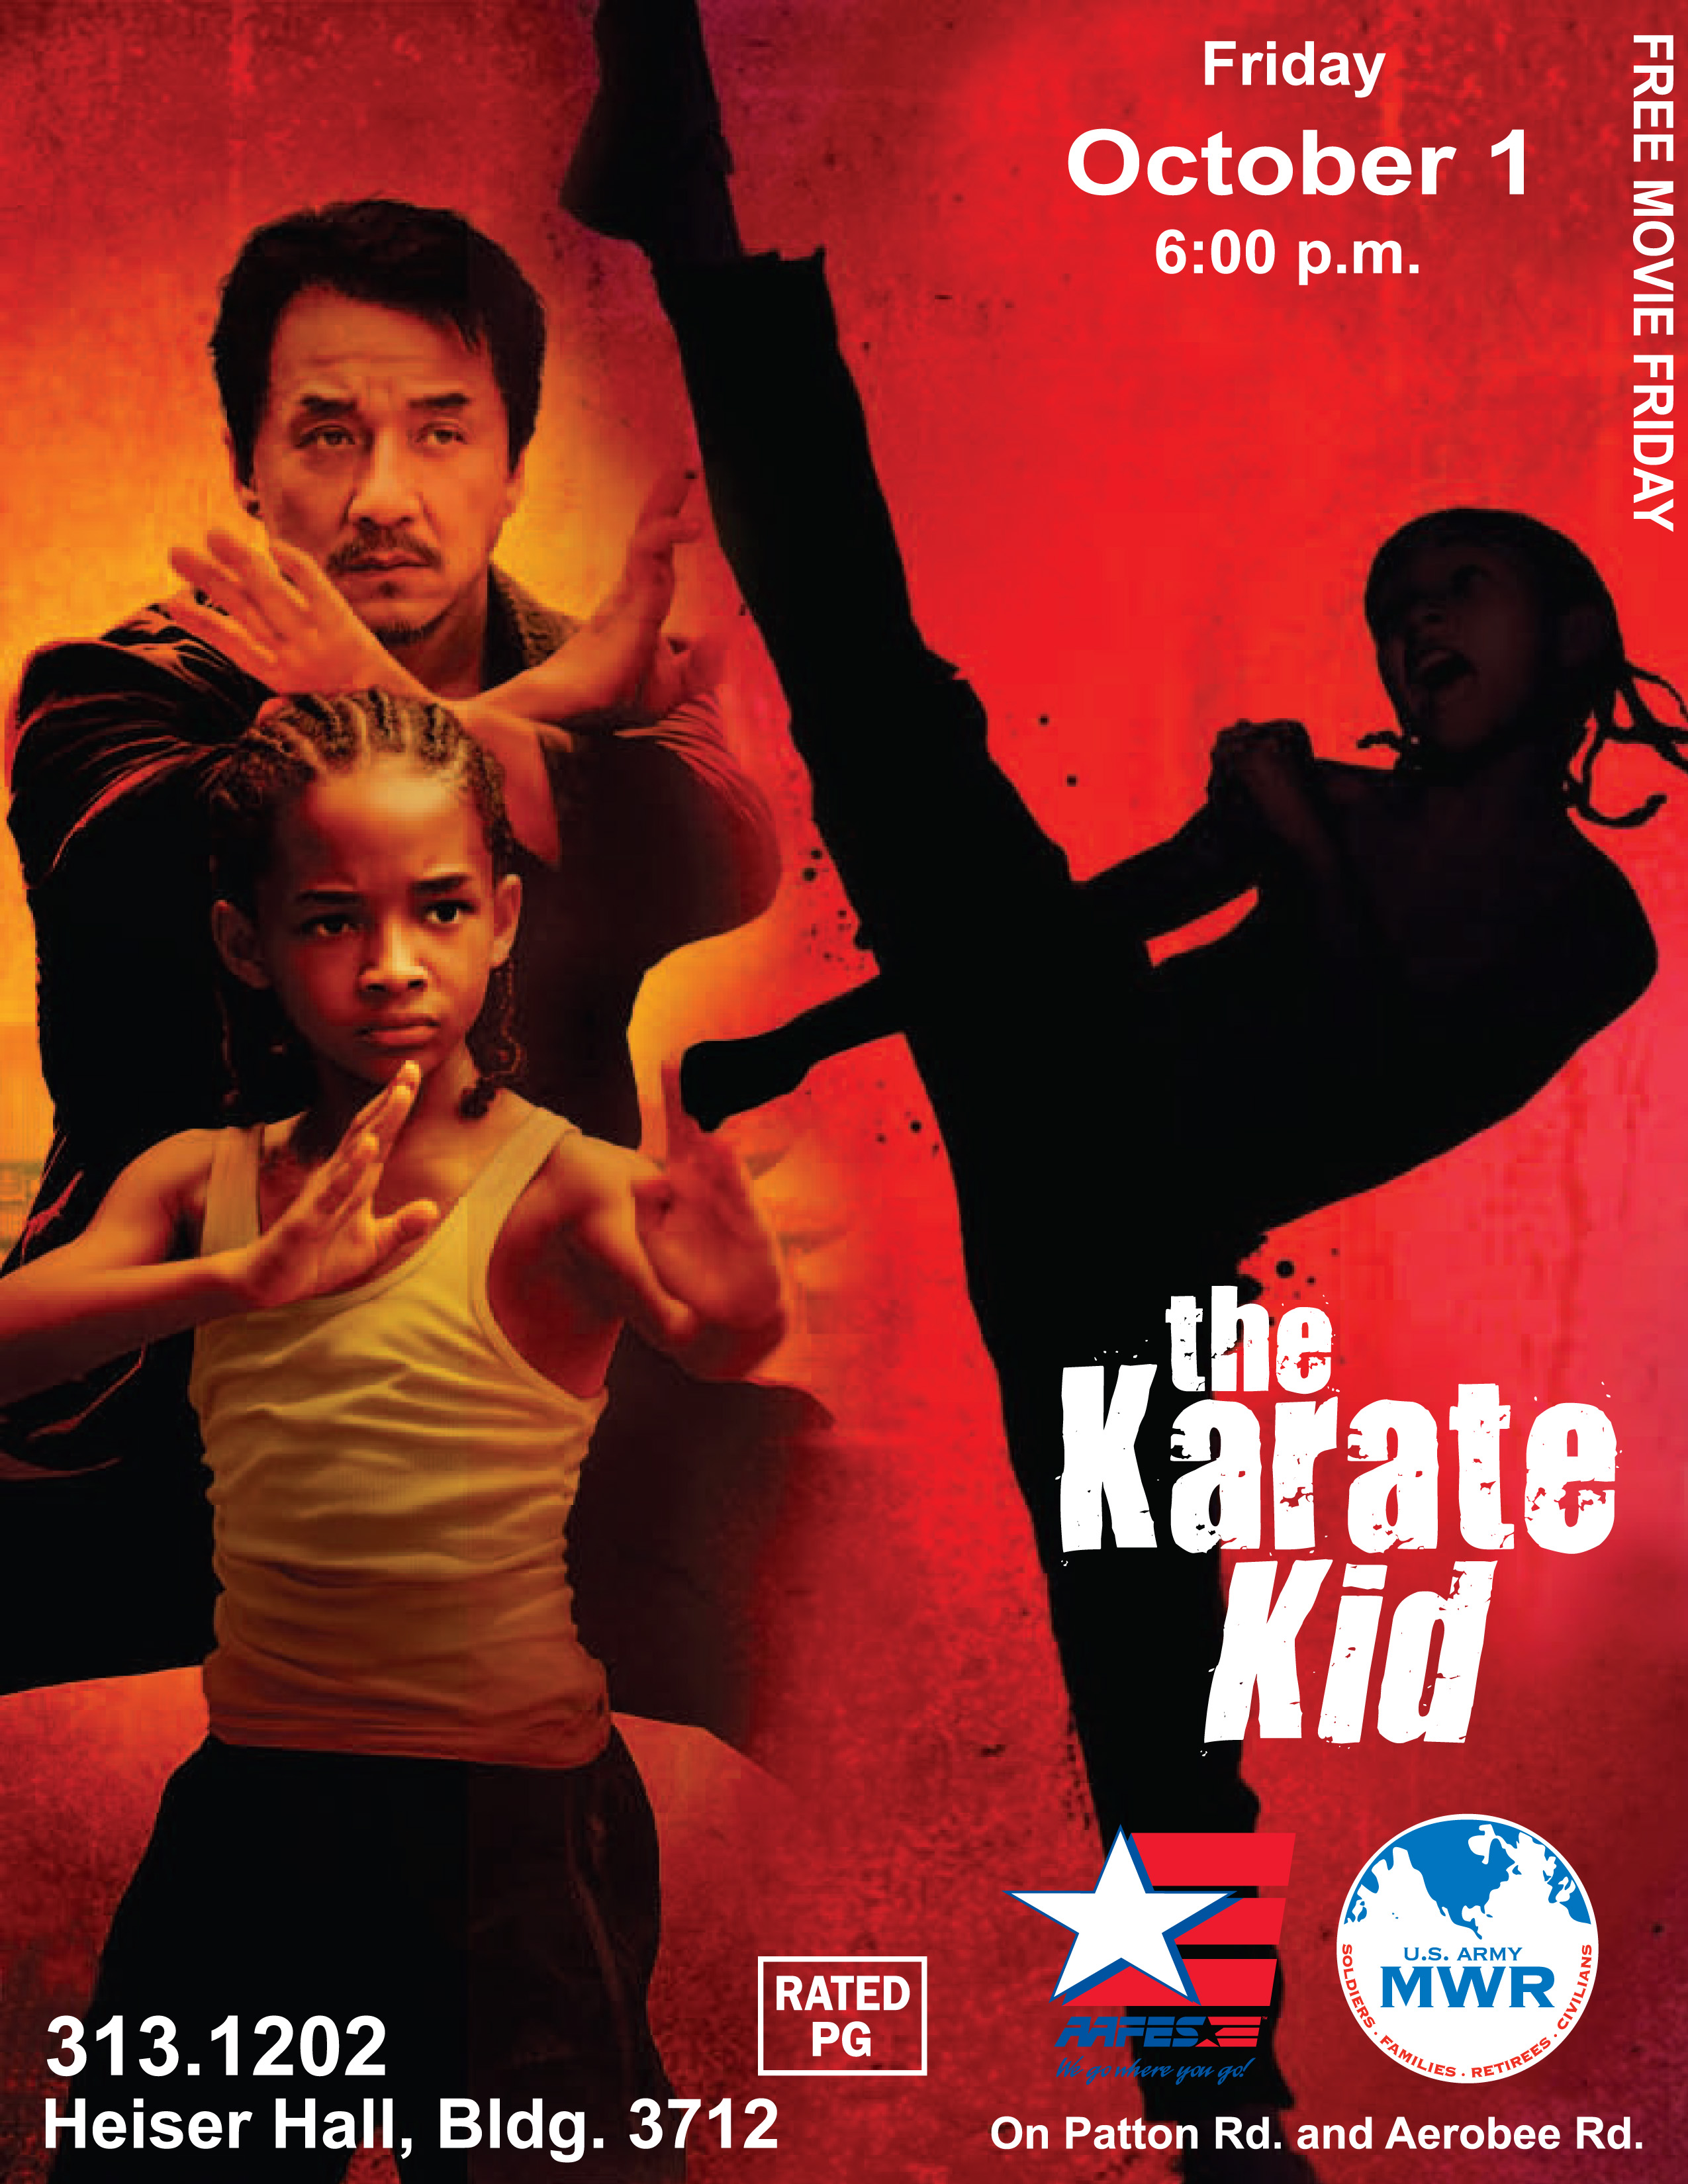 the karate kid 2010 full movie in english free download torrent